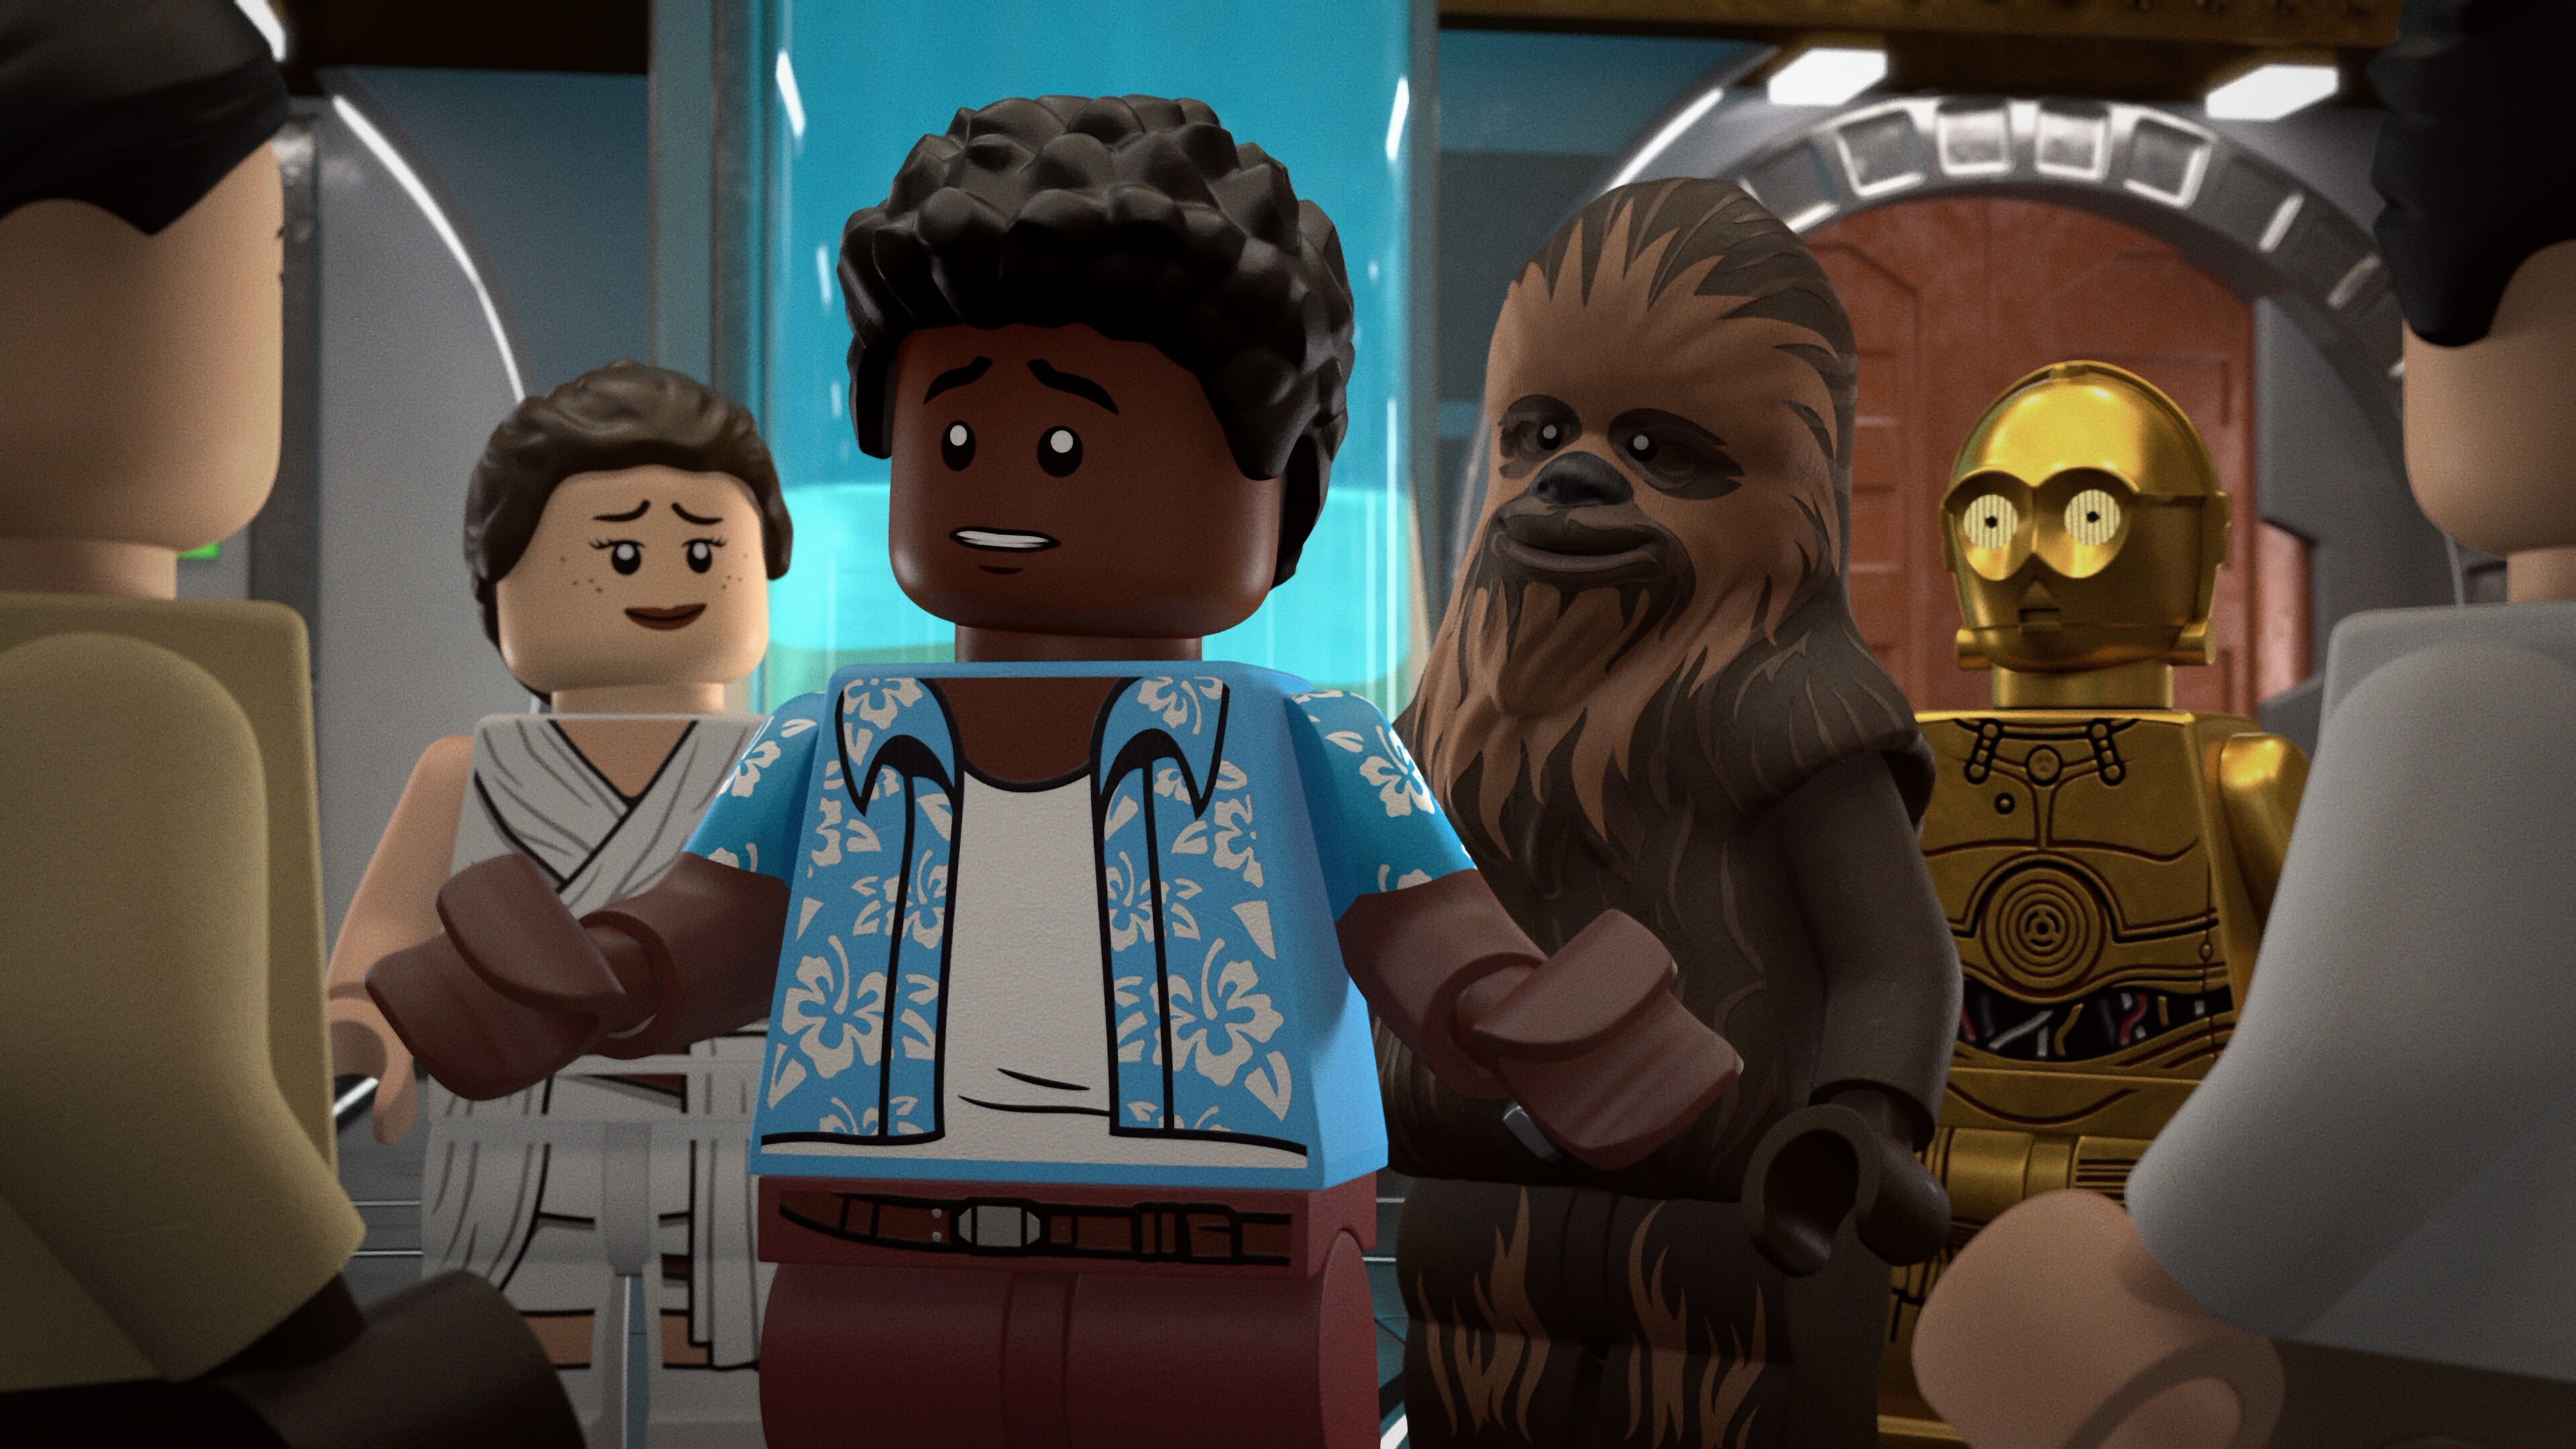 (L-R): Rose, Rey, Finn, Chewbacca, C-3PO and Poe in LEGO® STAR WARS SUMMER VACATION exclusively on Disney+. ©2022 Lucasfilm Ltd. & TM. All Rights Reserved.